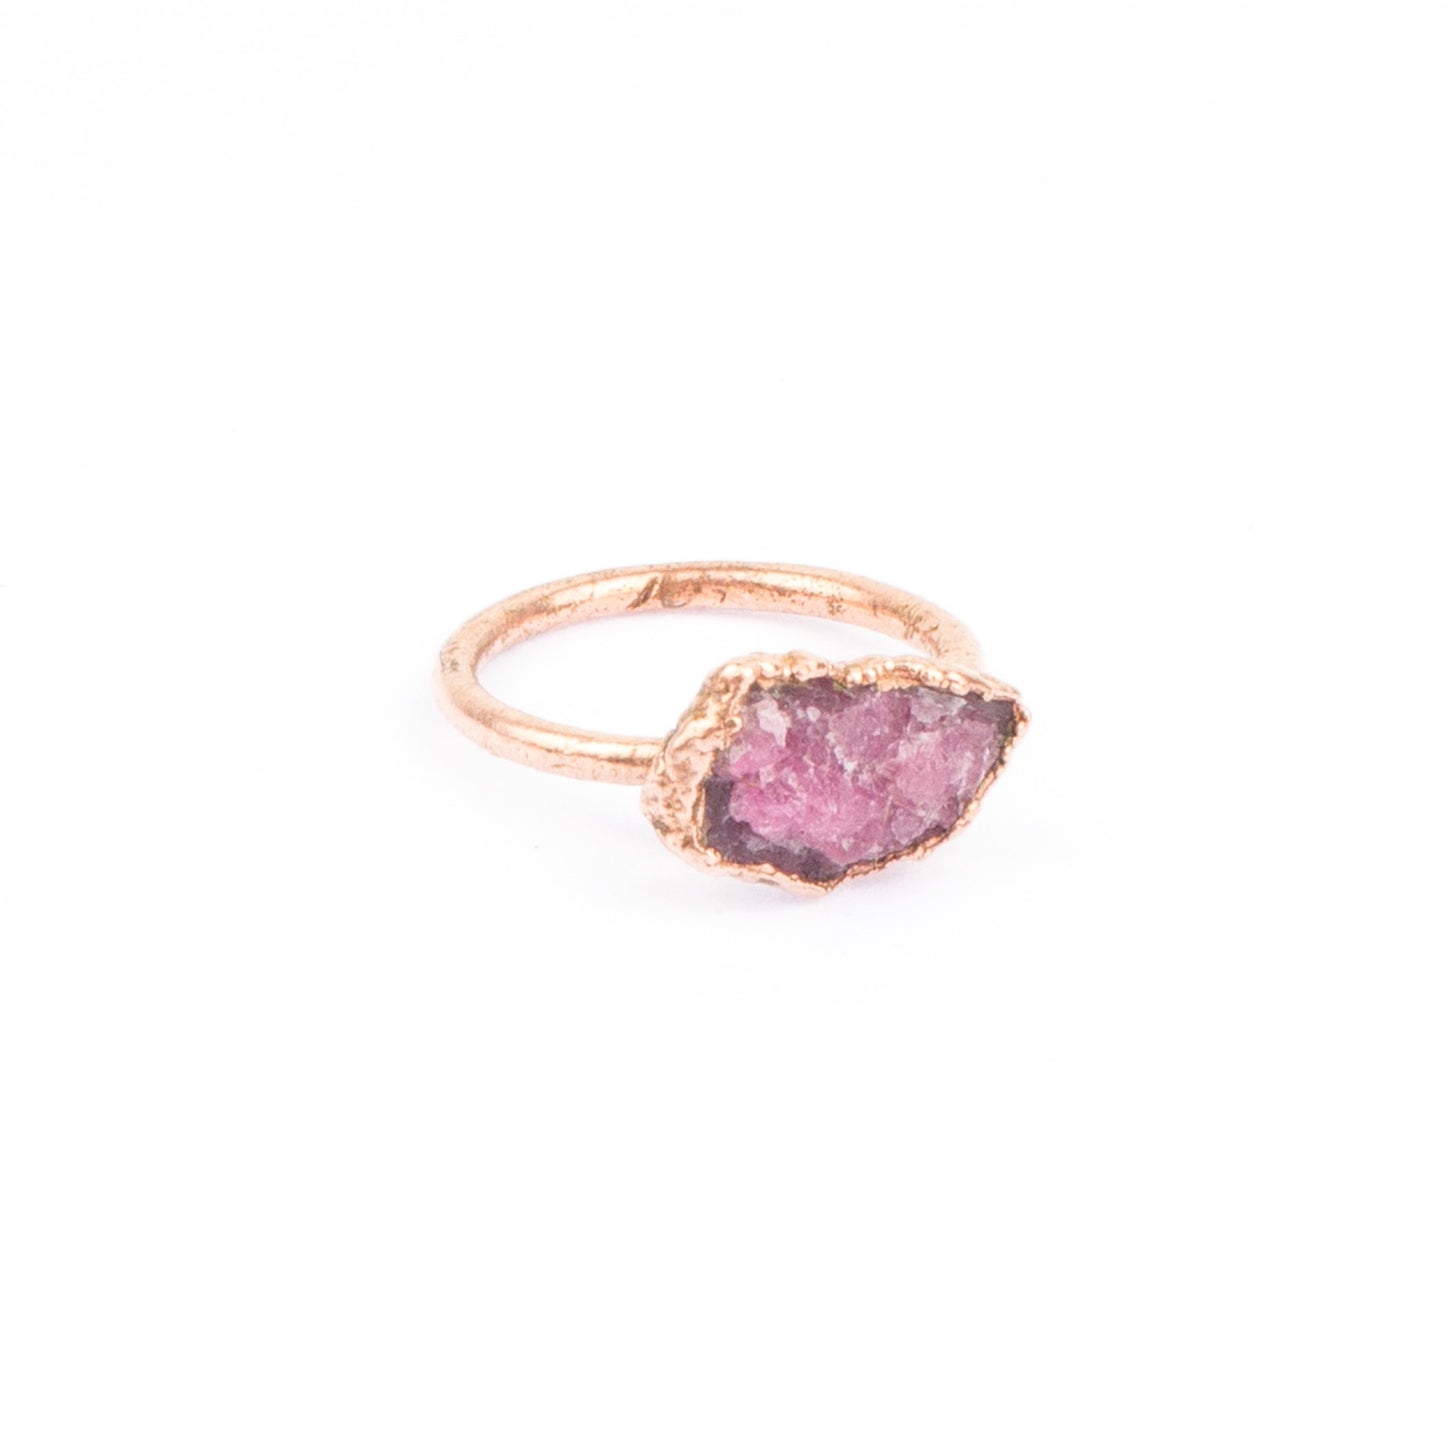 Large Pink Tourmaline Solitaire Ring (October Birthstone)